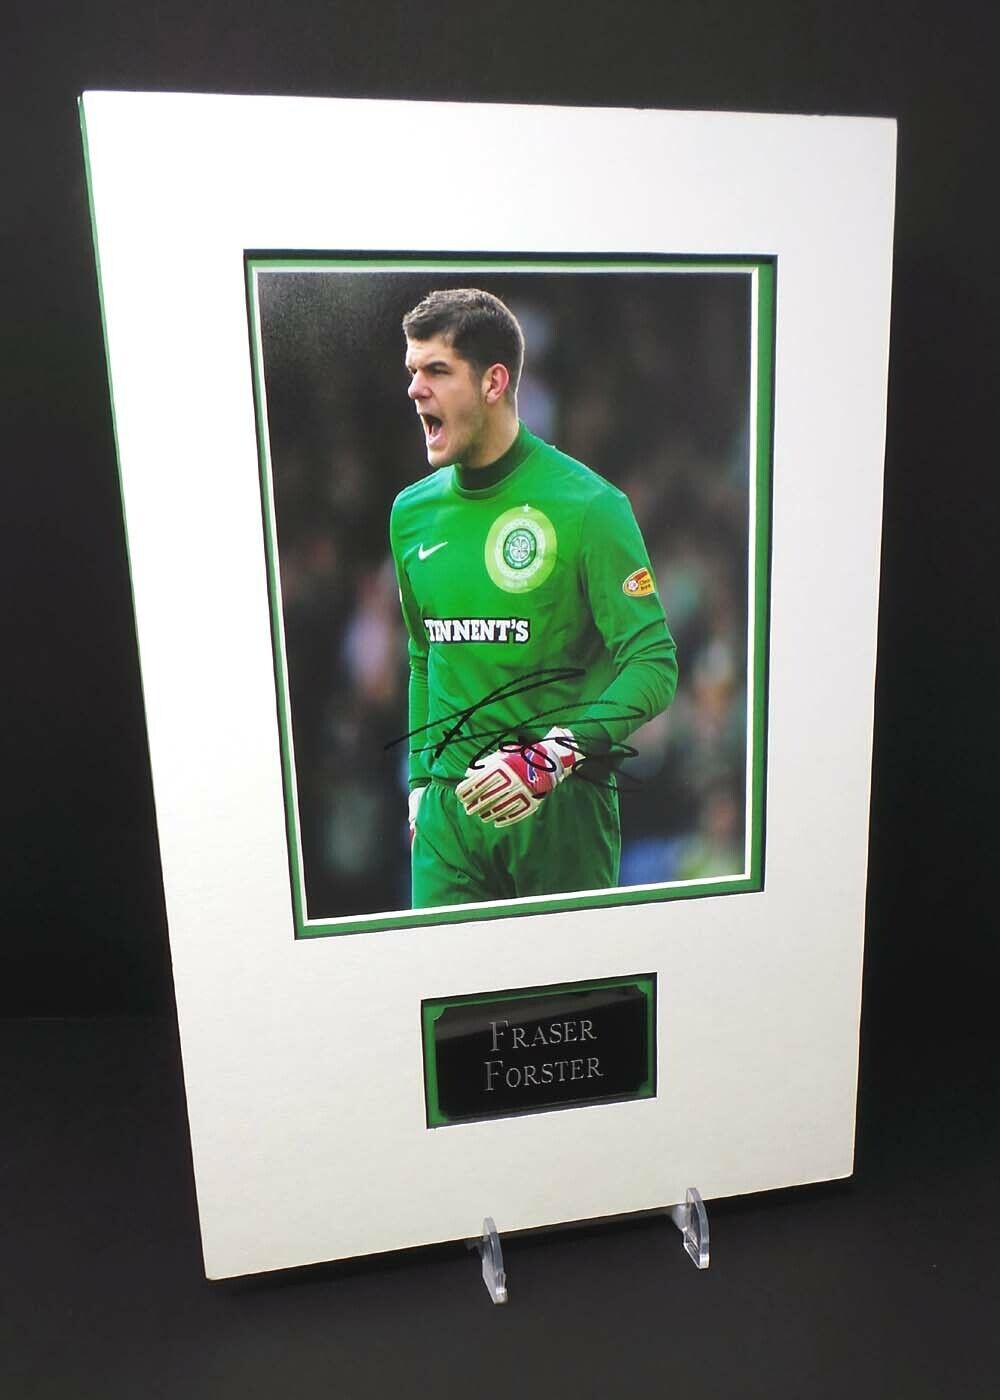 Fraser FORSTER Signed & Mounted 10x8 Celtic FC Football Photo Poster painting AFTAL RD COA